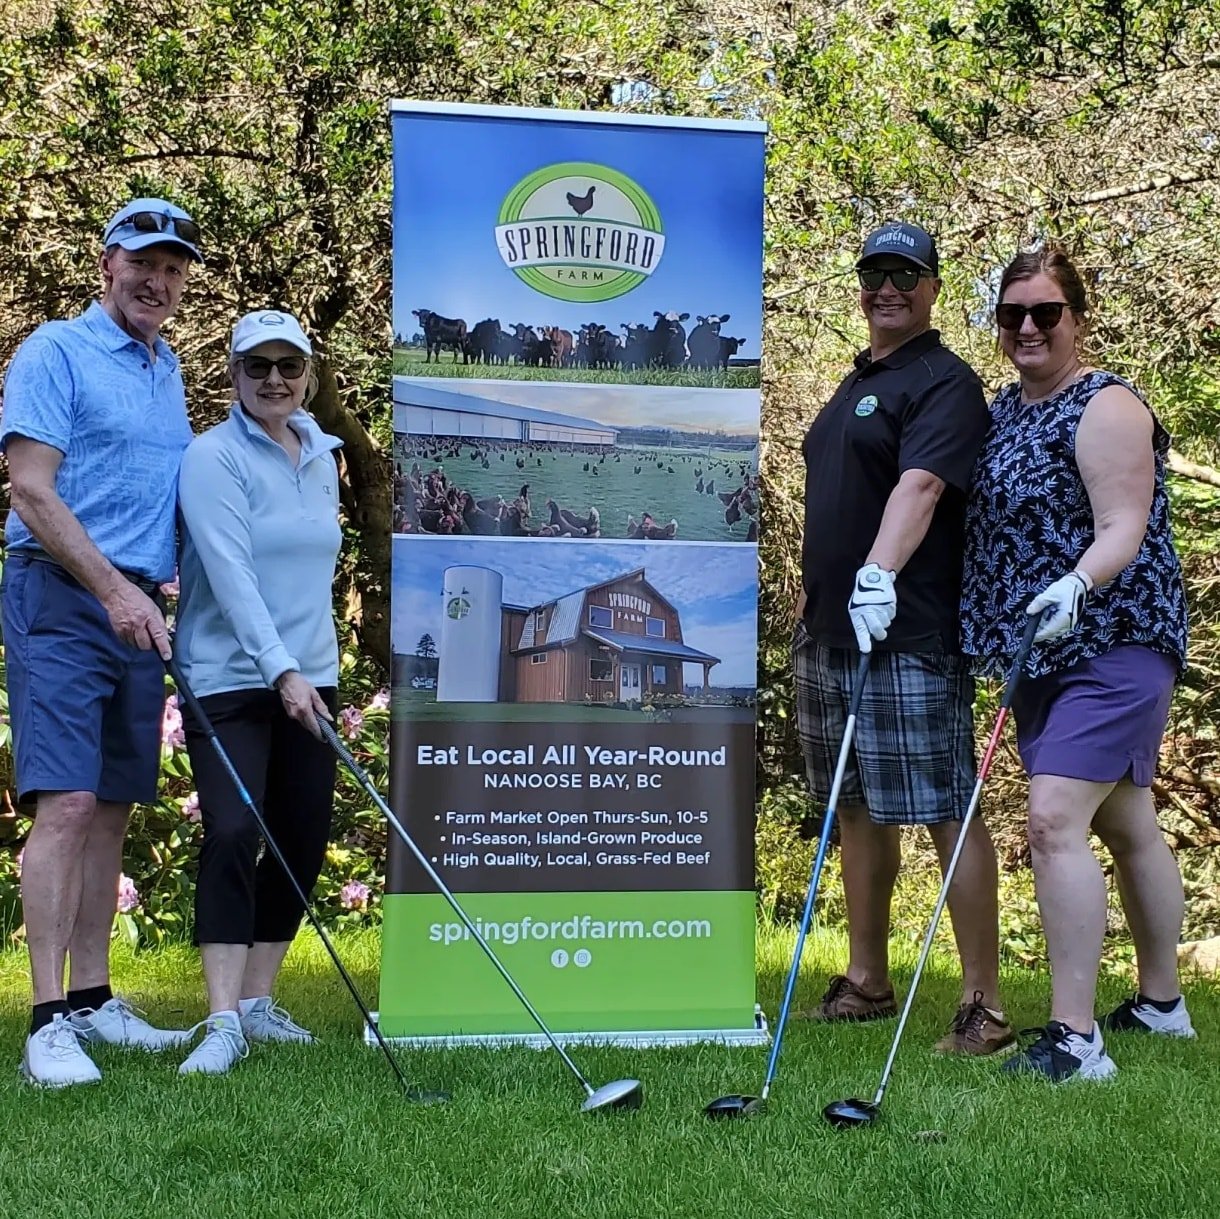 We had an awesome time at the Tee Off For NCS Charity Golf Tournament yesterday!! 🏌️
 
It was an honour to sponsor a hole, play alongside fantastic teams, and support such a meaningful cause in our community. The gorgeous weather was the cherry on t